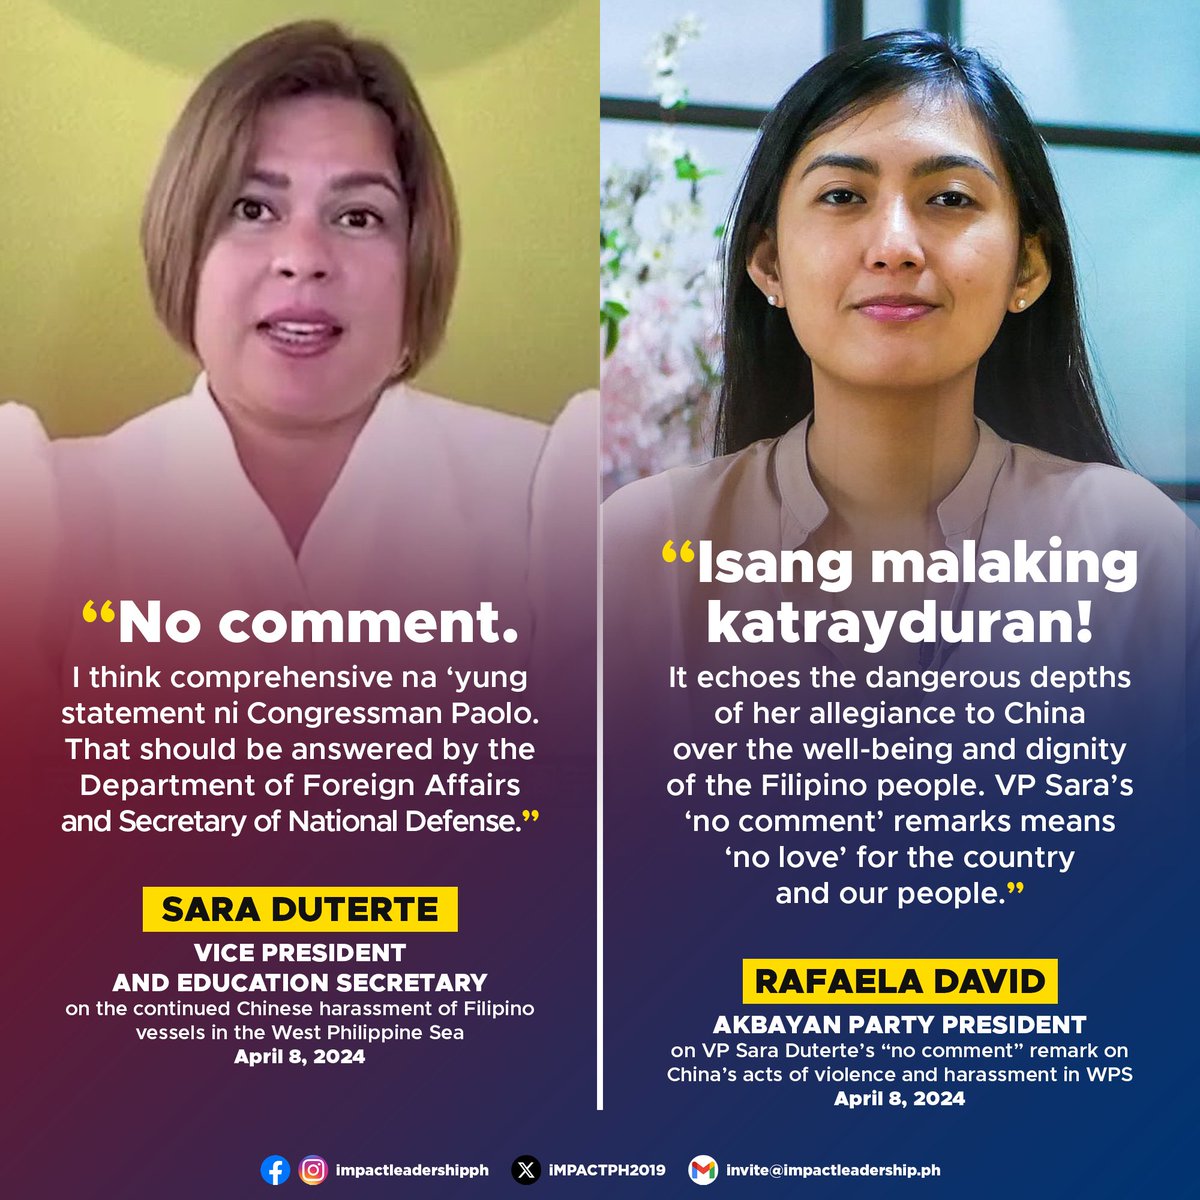 'MOST TRAITOROUS TWO WORDS'

Akbayan President Rafaela David says VP Sara Duterte's 'no comment' remark on China's acts of violence and harassment in the West Philippine Sea (WPS) 'epitomizes the most traitorous two words uttered by the second highest leader of the land'.